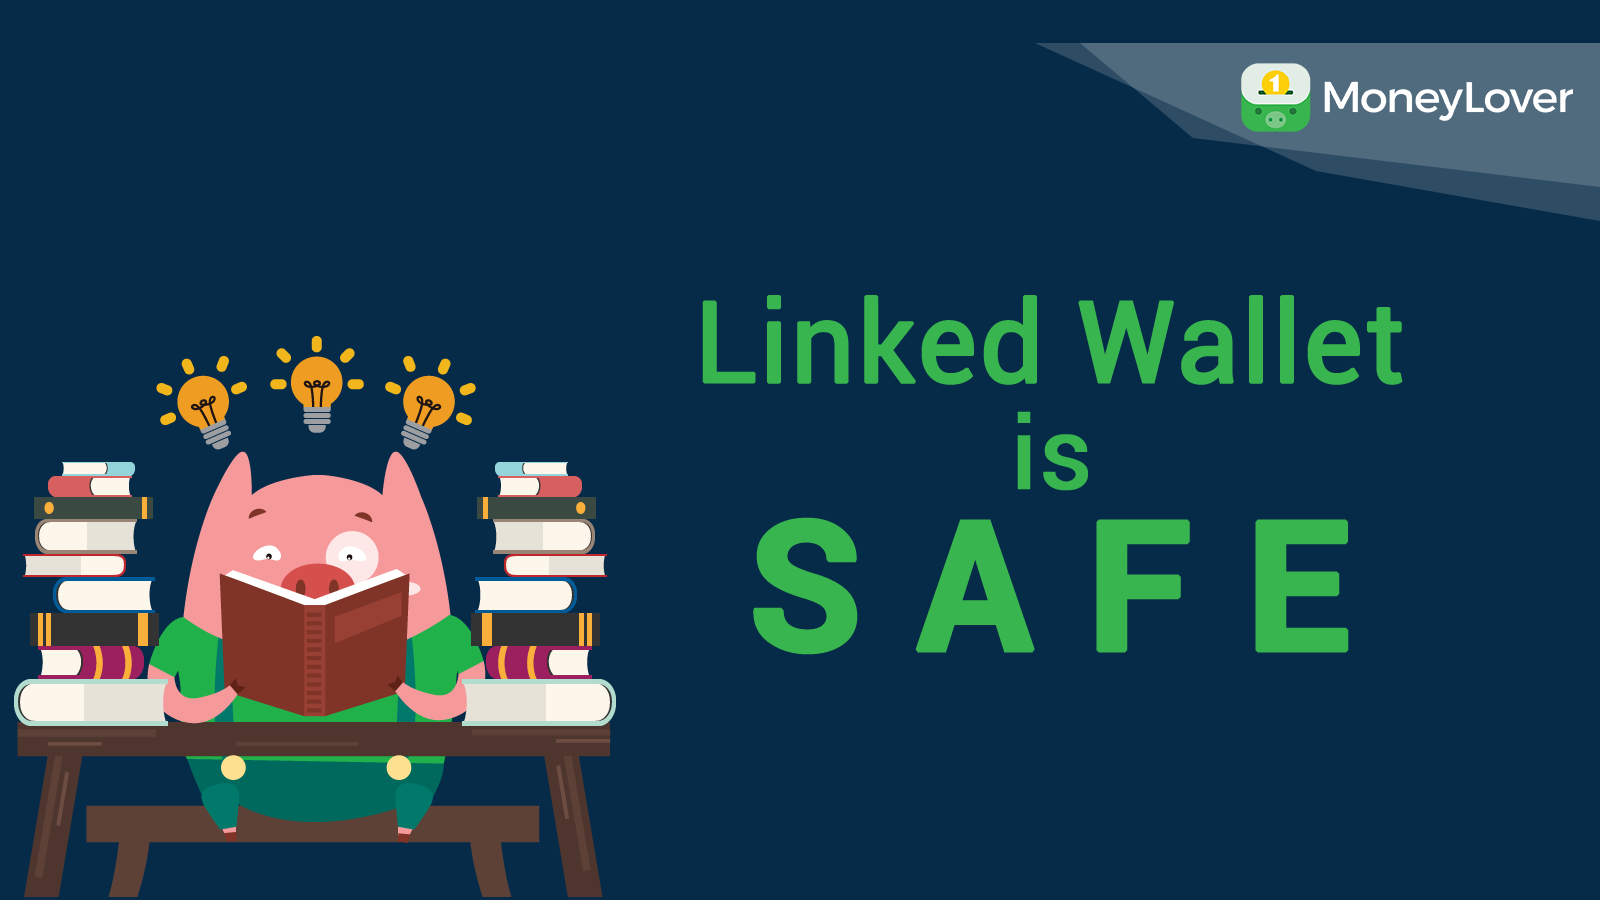 HOW WE ENSURE THE SECURITY OF LINKED WALLET?